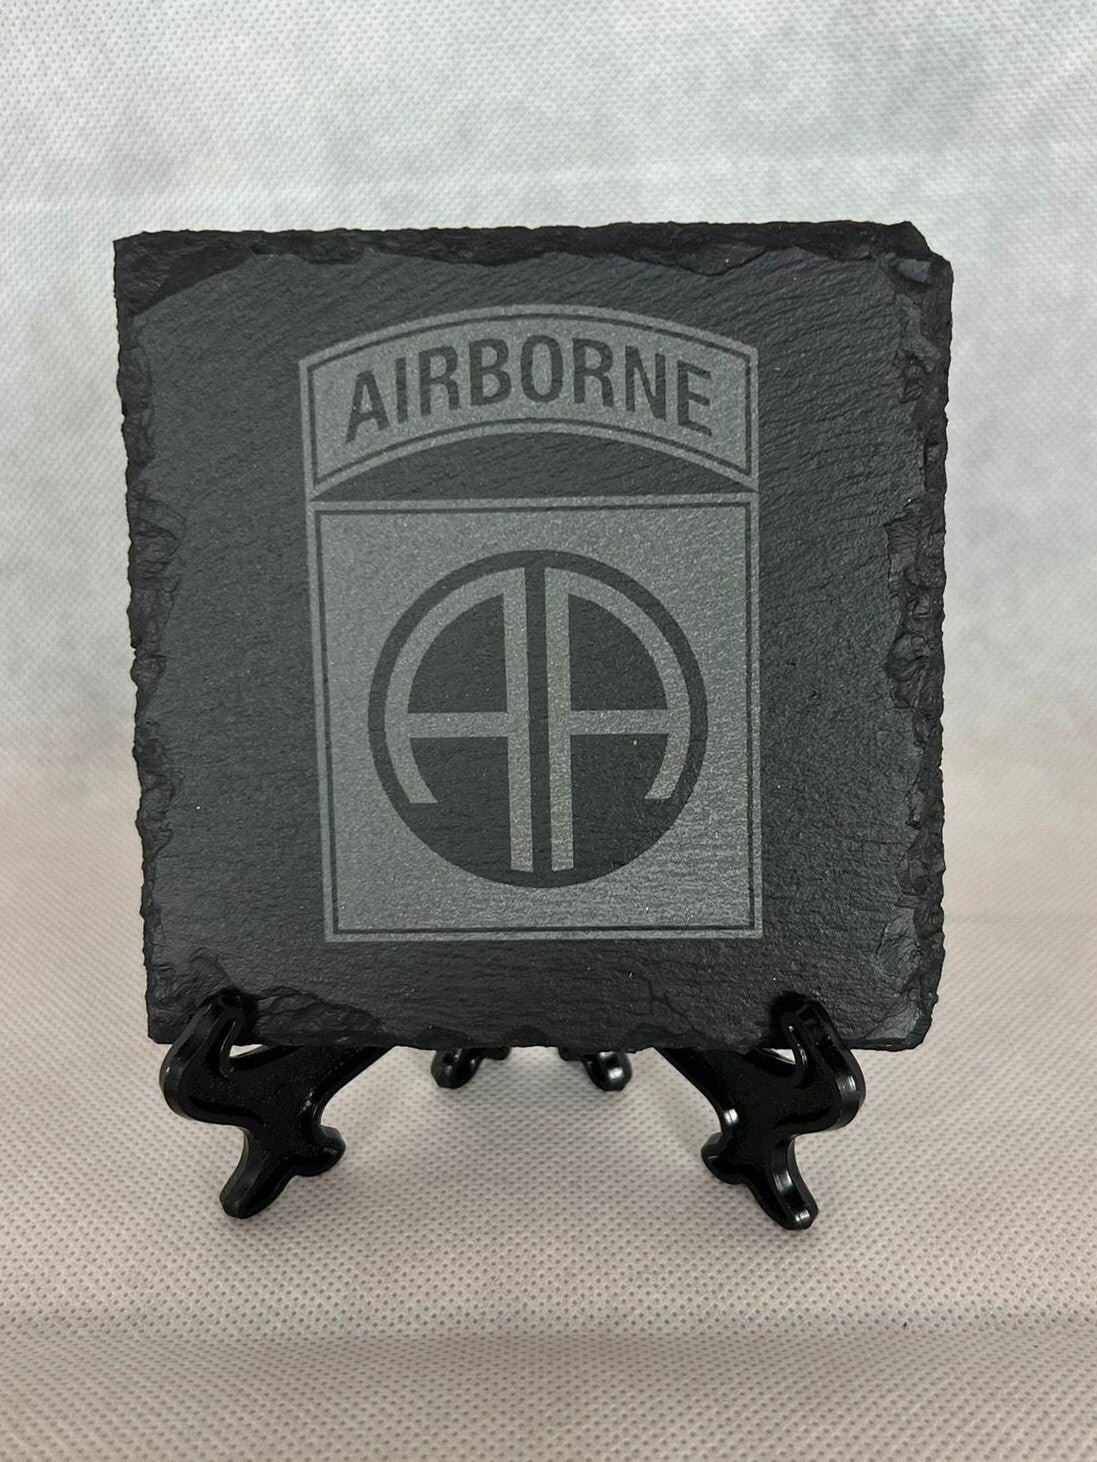 Laser Engraved Slate Coaster with the 82nd Airborne Division Logo